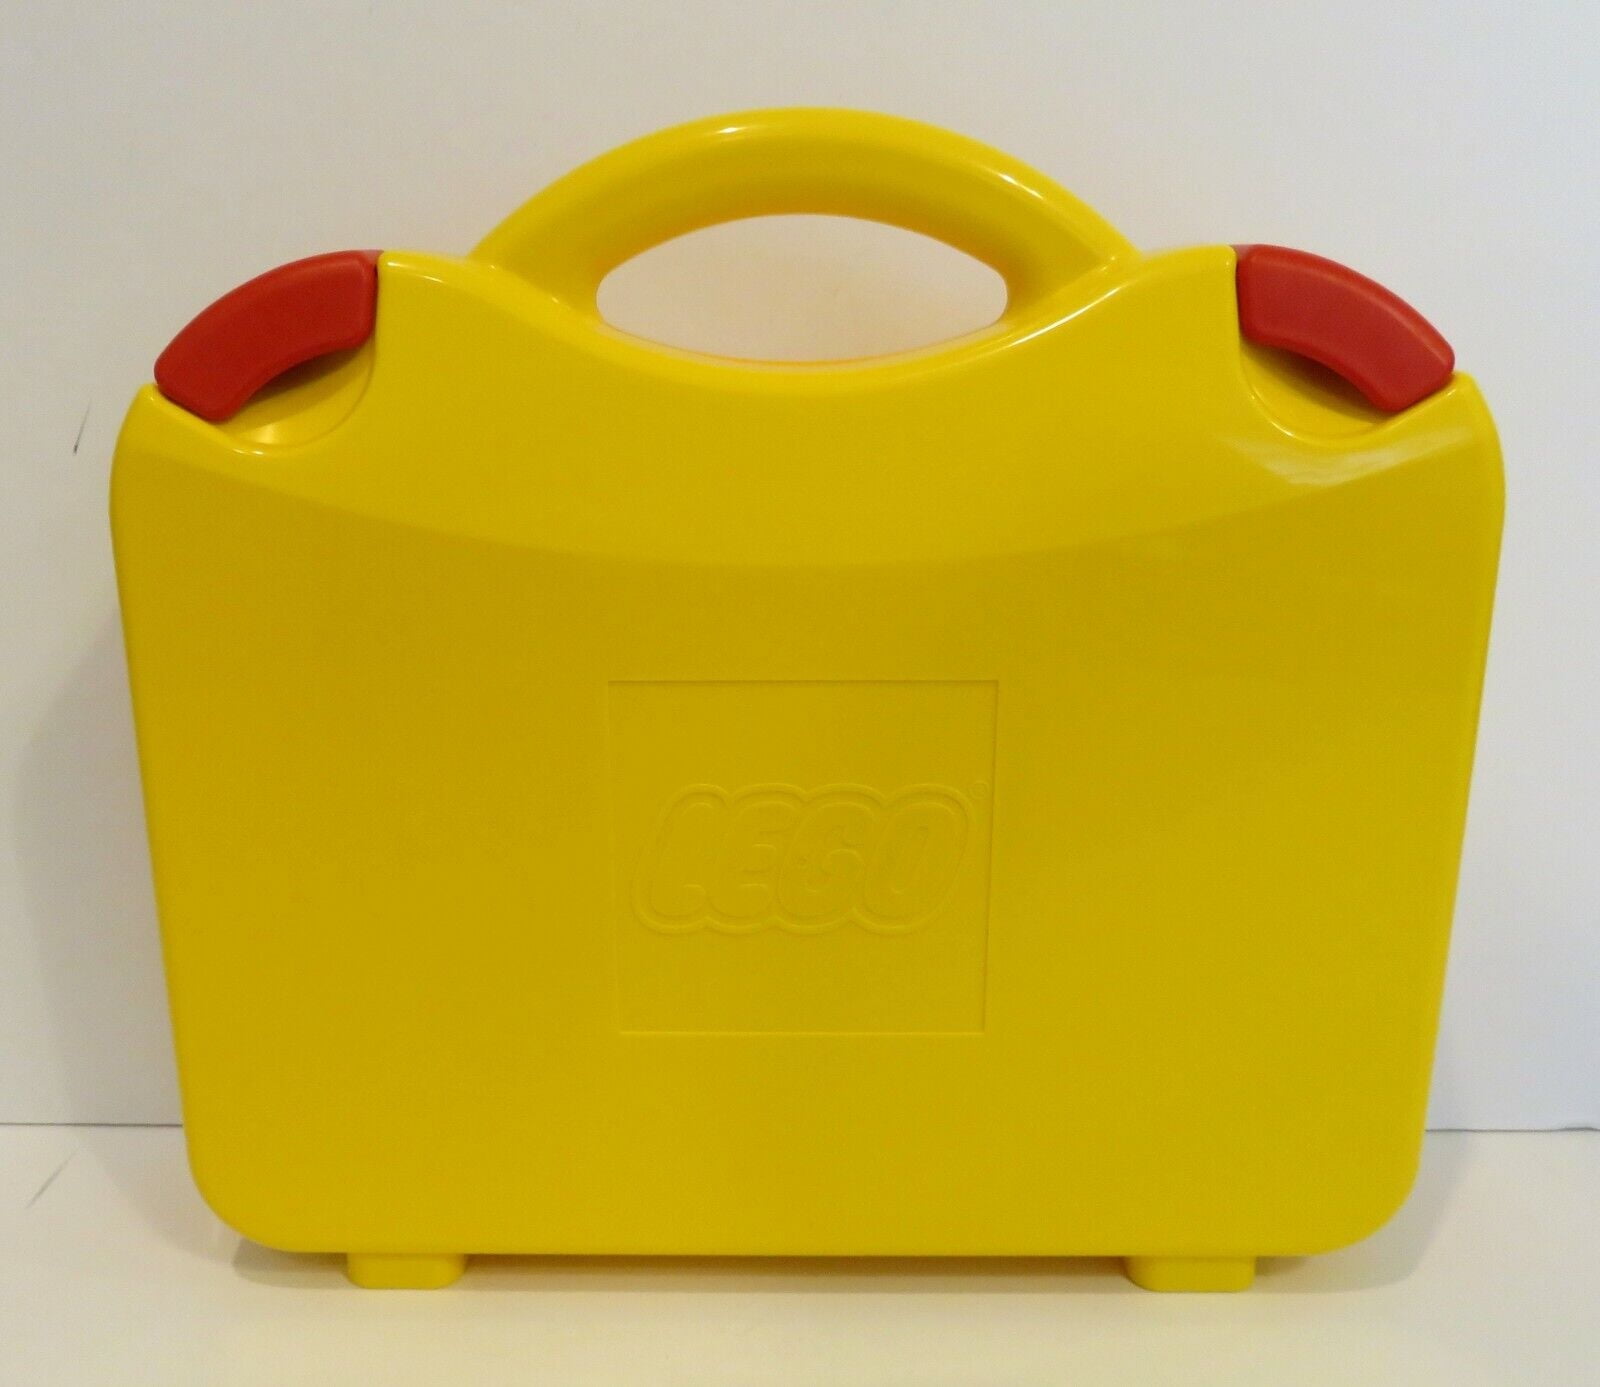 LEGO Travel Case (orange/yellow with red clips includes divider inserts)